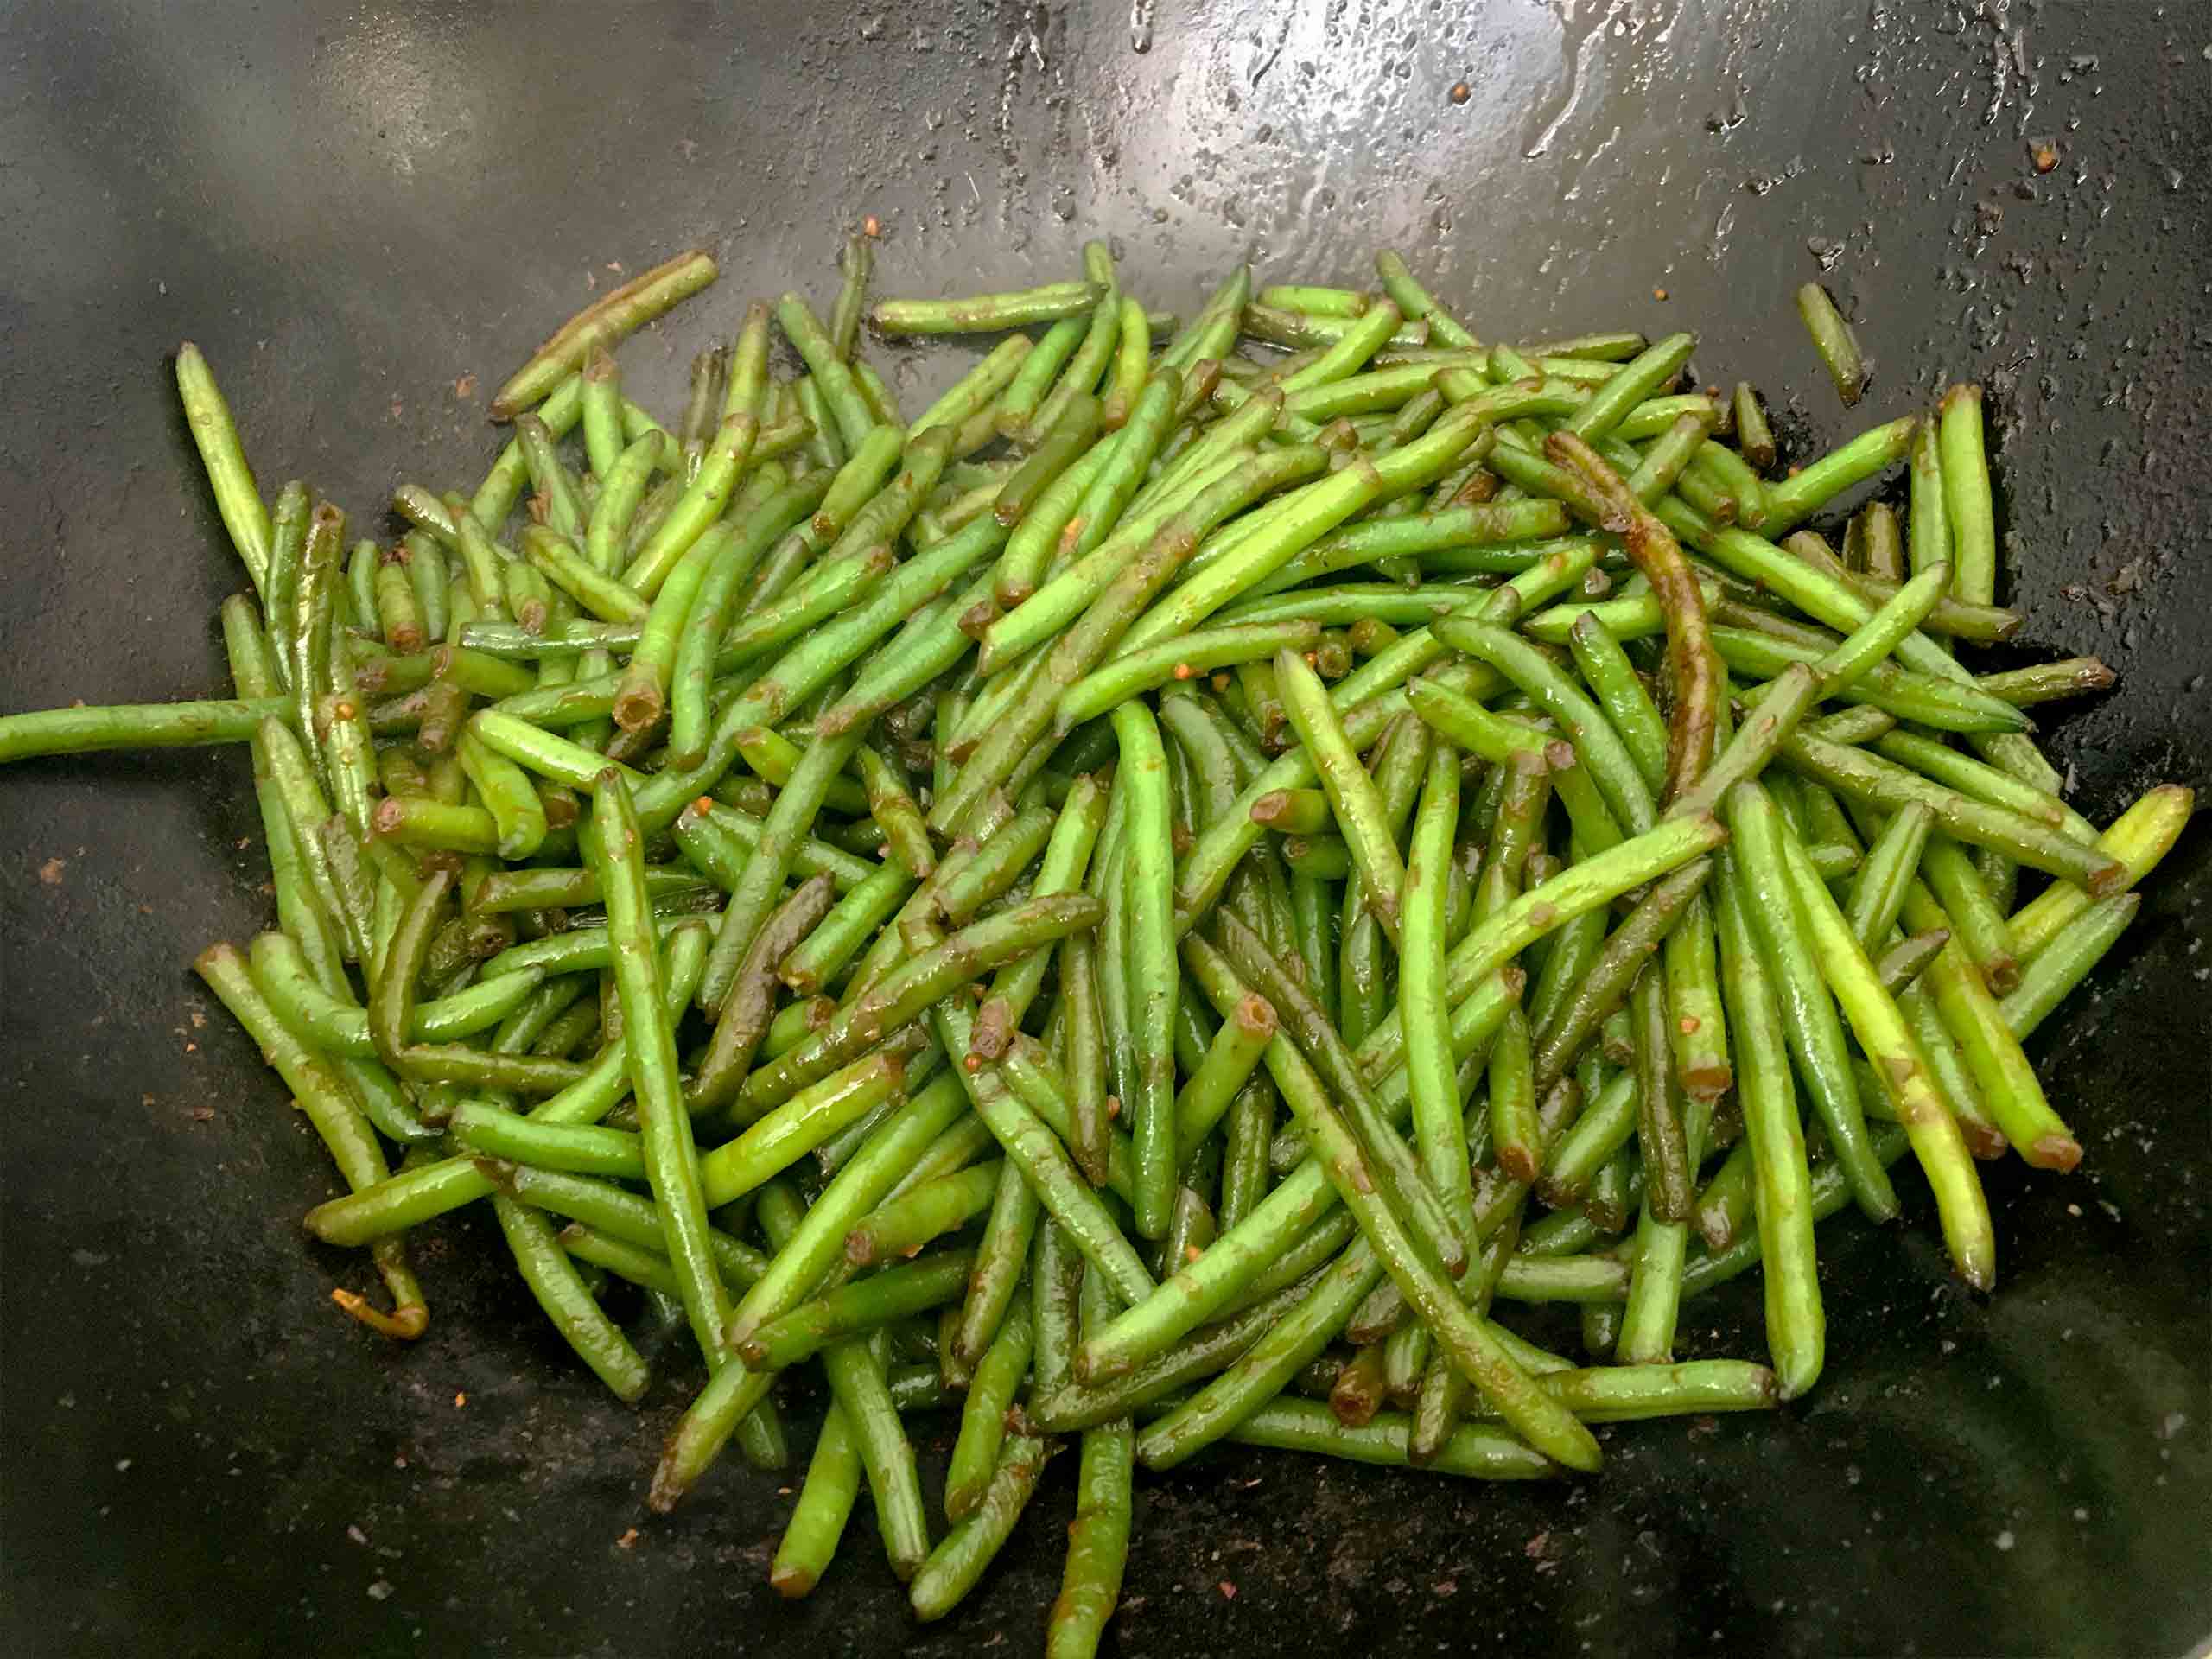 Add the soy sauce to the green beans.